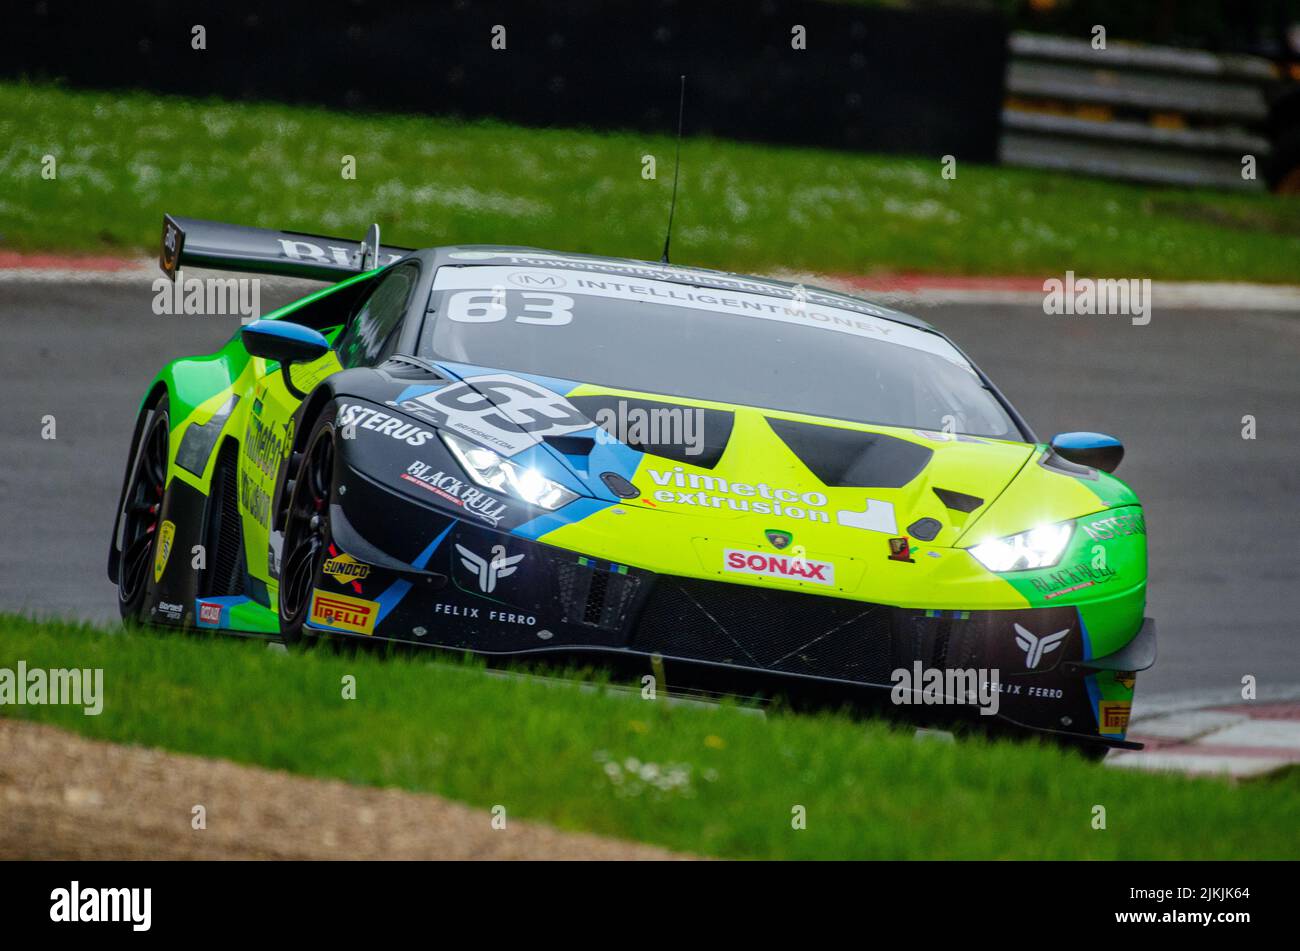 A low angle shot of a Lamborghini Orocan green car car during the race in the British GT Championship, Stock Photo